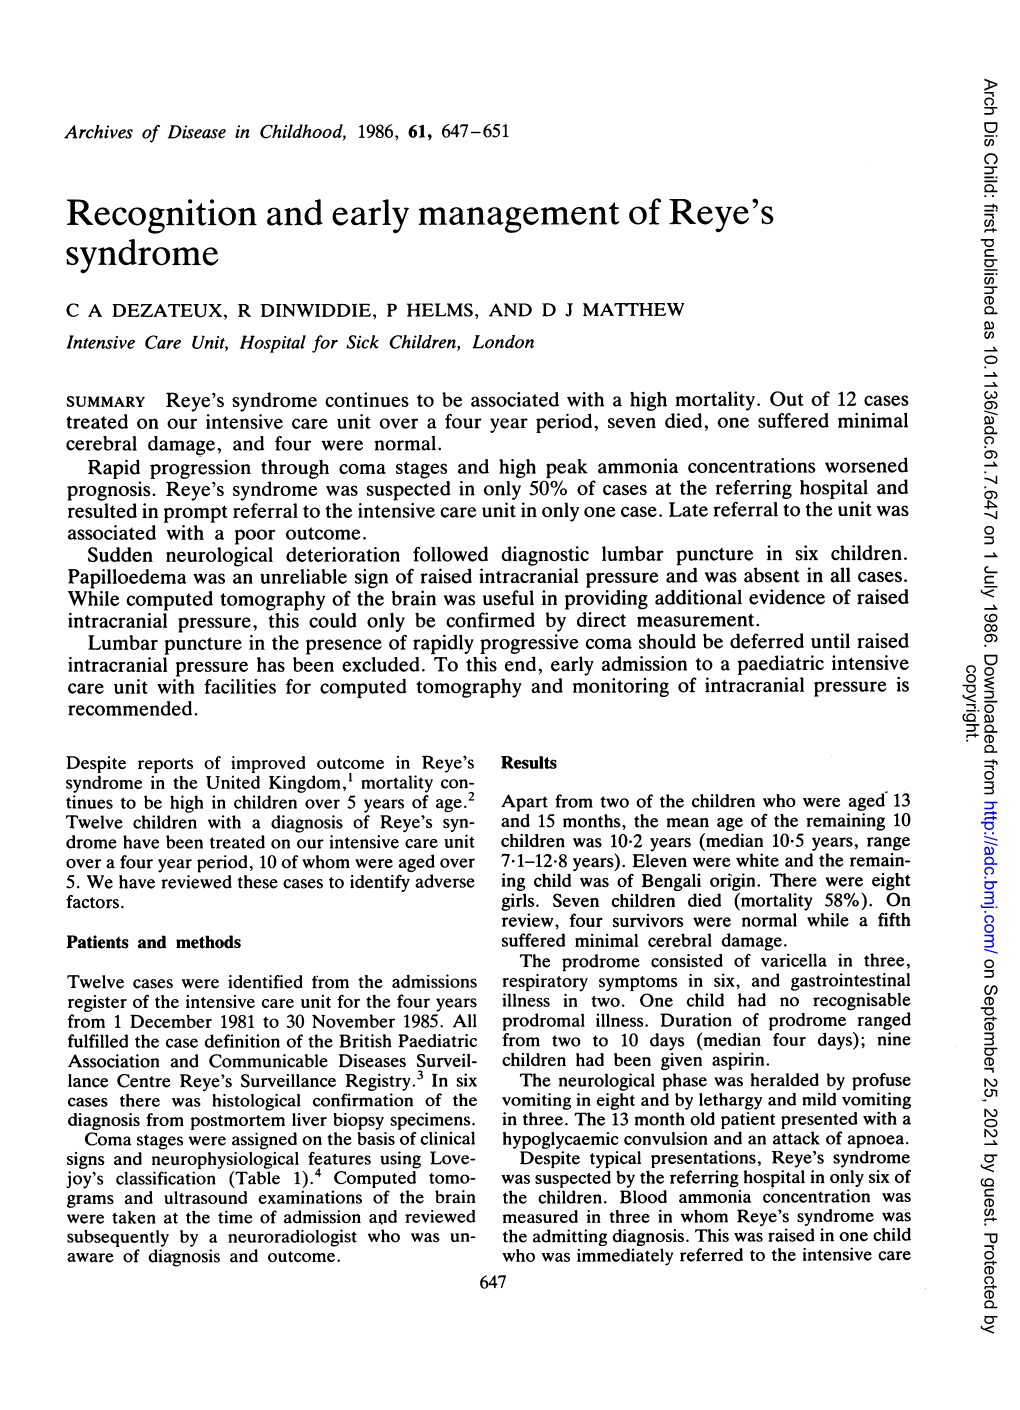 Recognition and Early Management of Reye's Syndrome